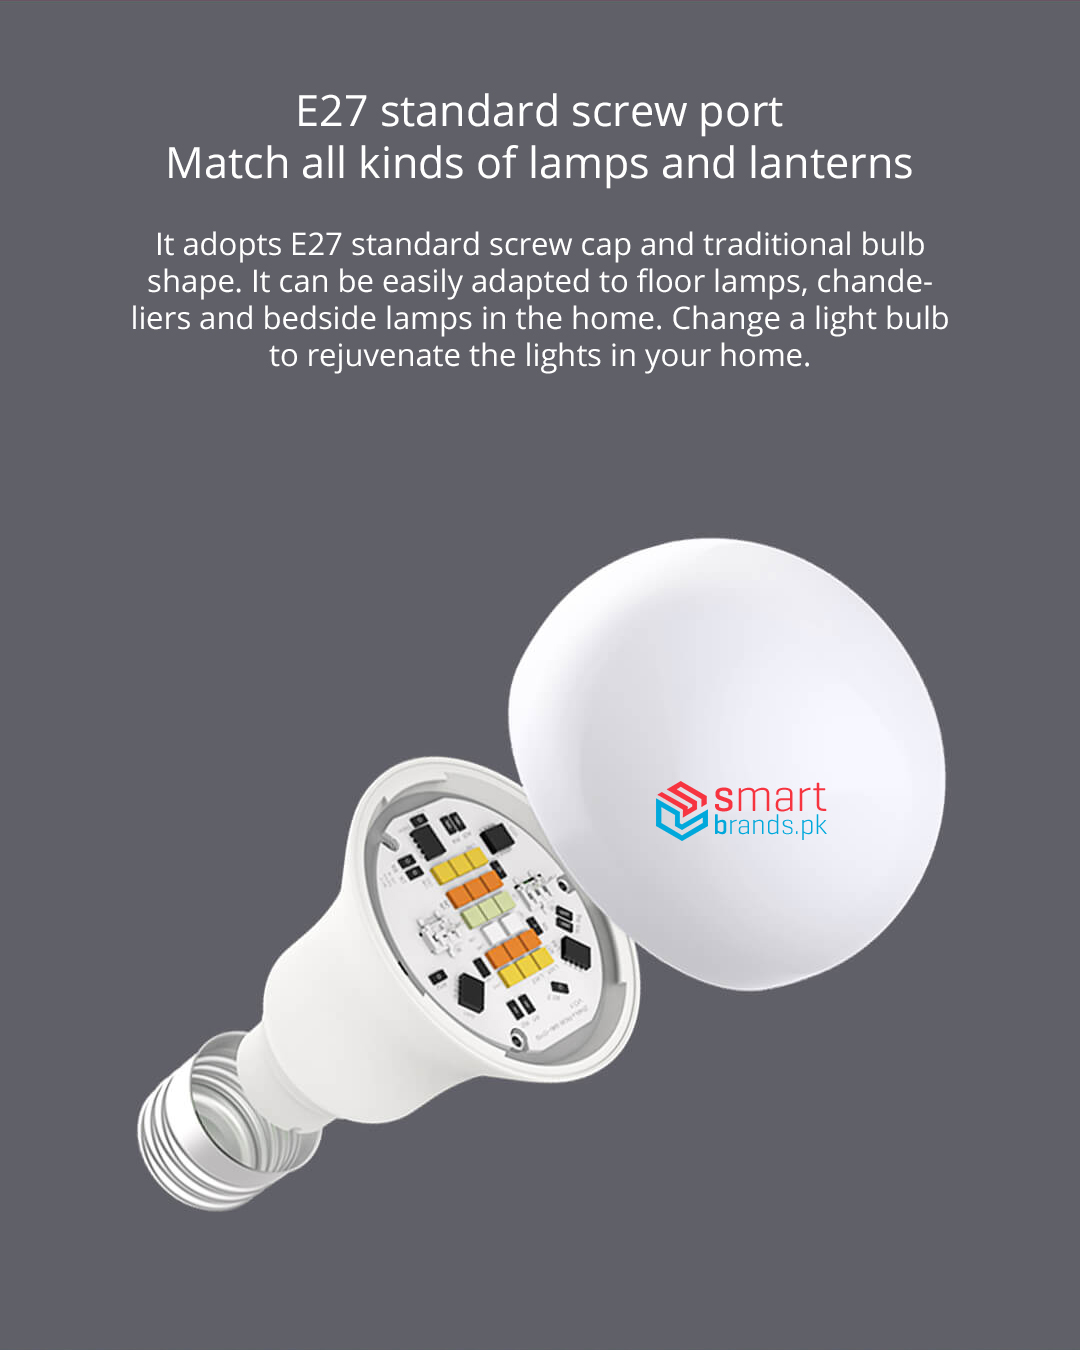 It adopts E27 standard screw cap and traditional bulb shape. It can be easily adapted to floor lamps, chandeliers and bedside lamps in the home. Change a light bulb to rejuvenate the lights in your home.